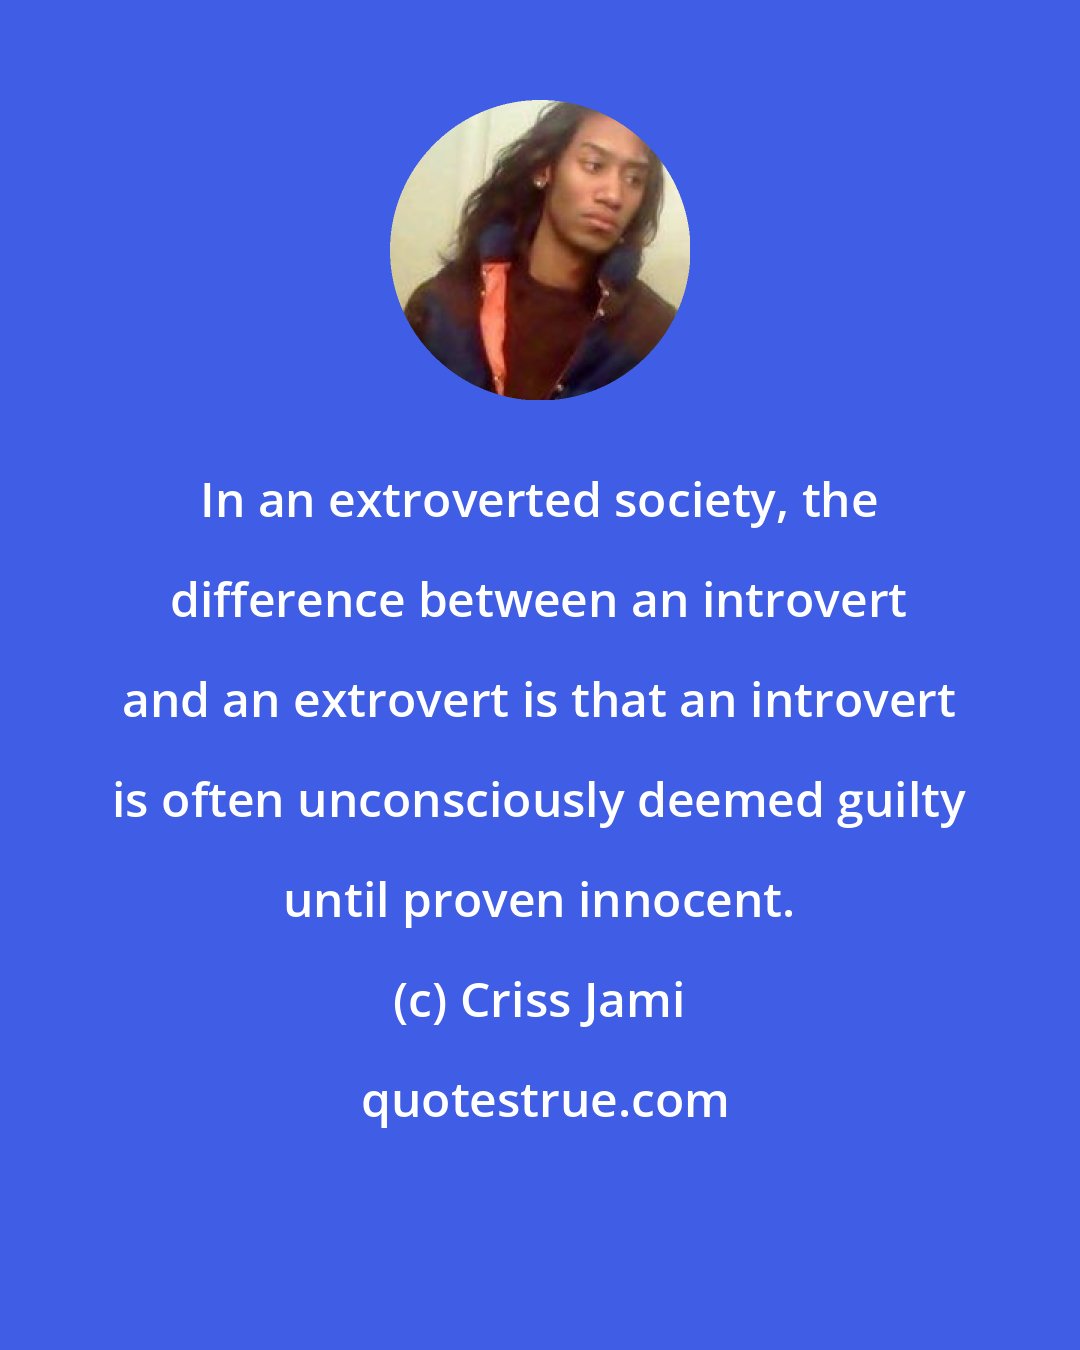 Criss Jami: In an extroverted society, the difference between an introvert and an extrovert is that an introvert is often unconsciously deemed guilty until proven innocent.